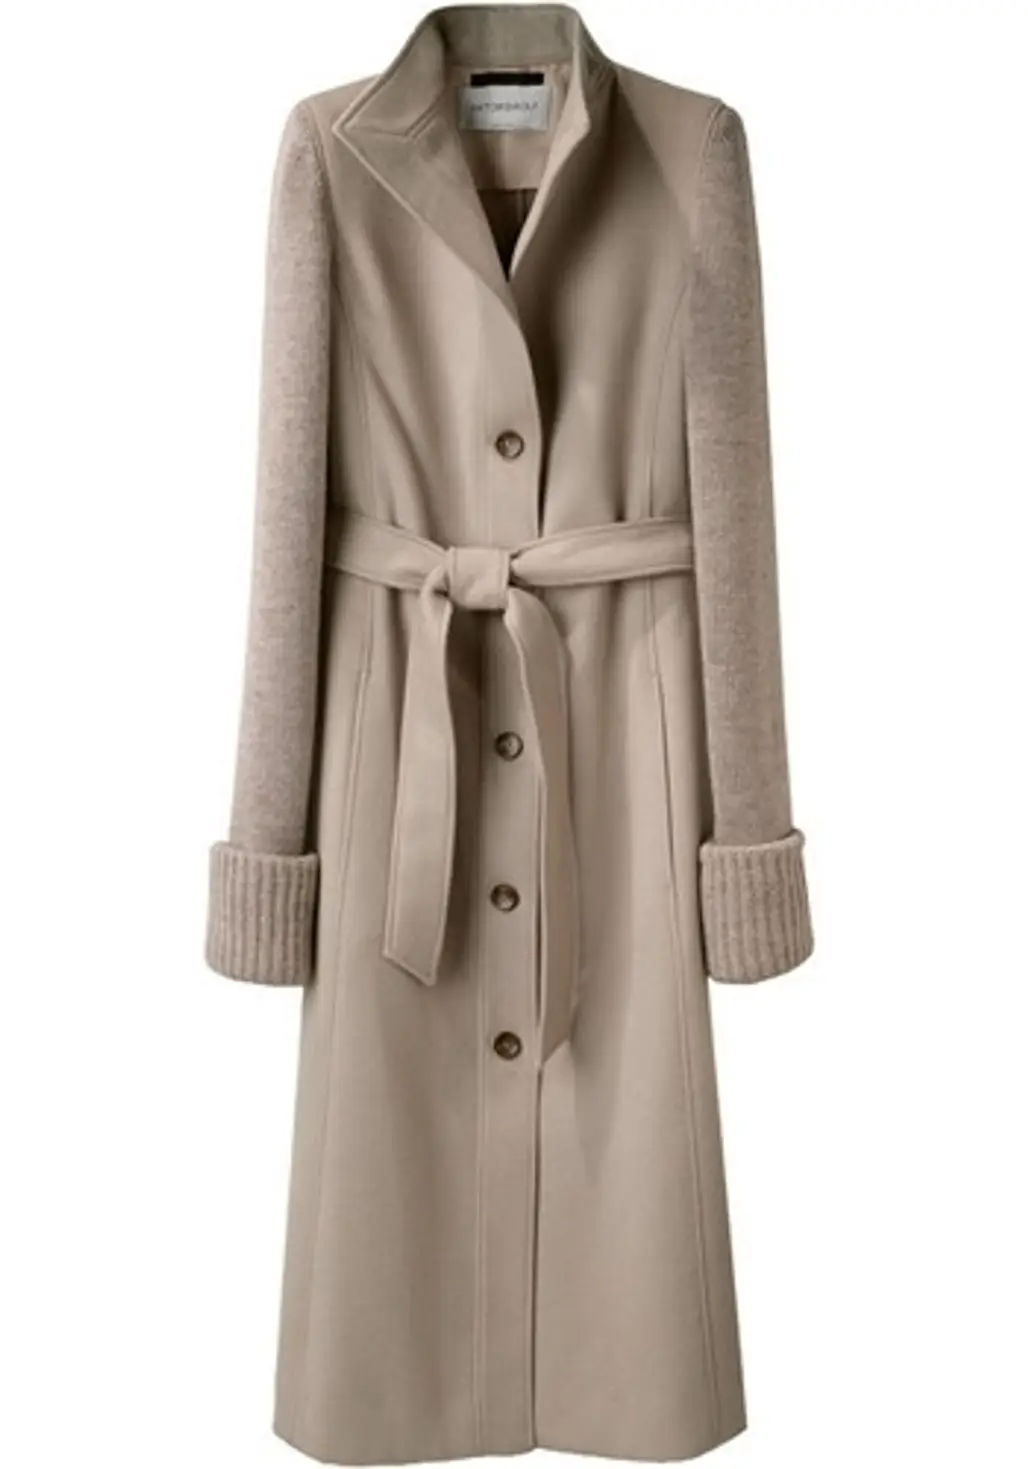 Viktor & Rolf Wool Coat with Knit Sleeves